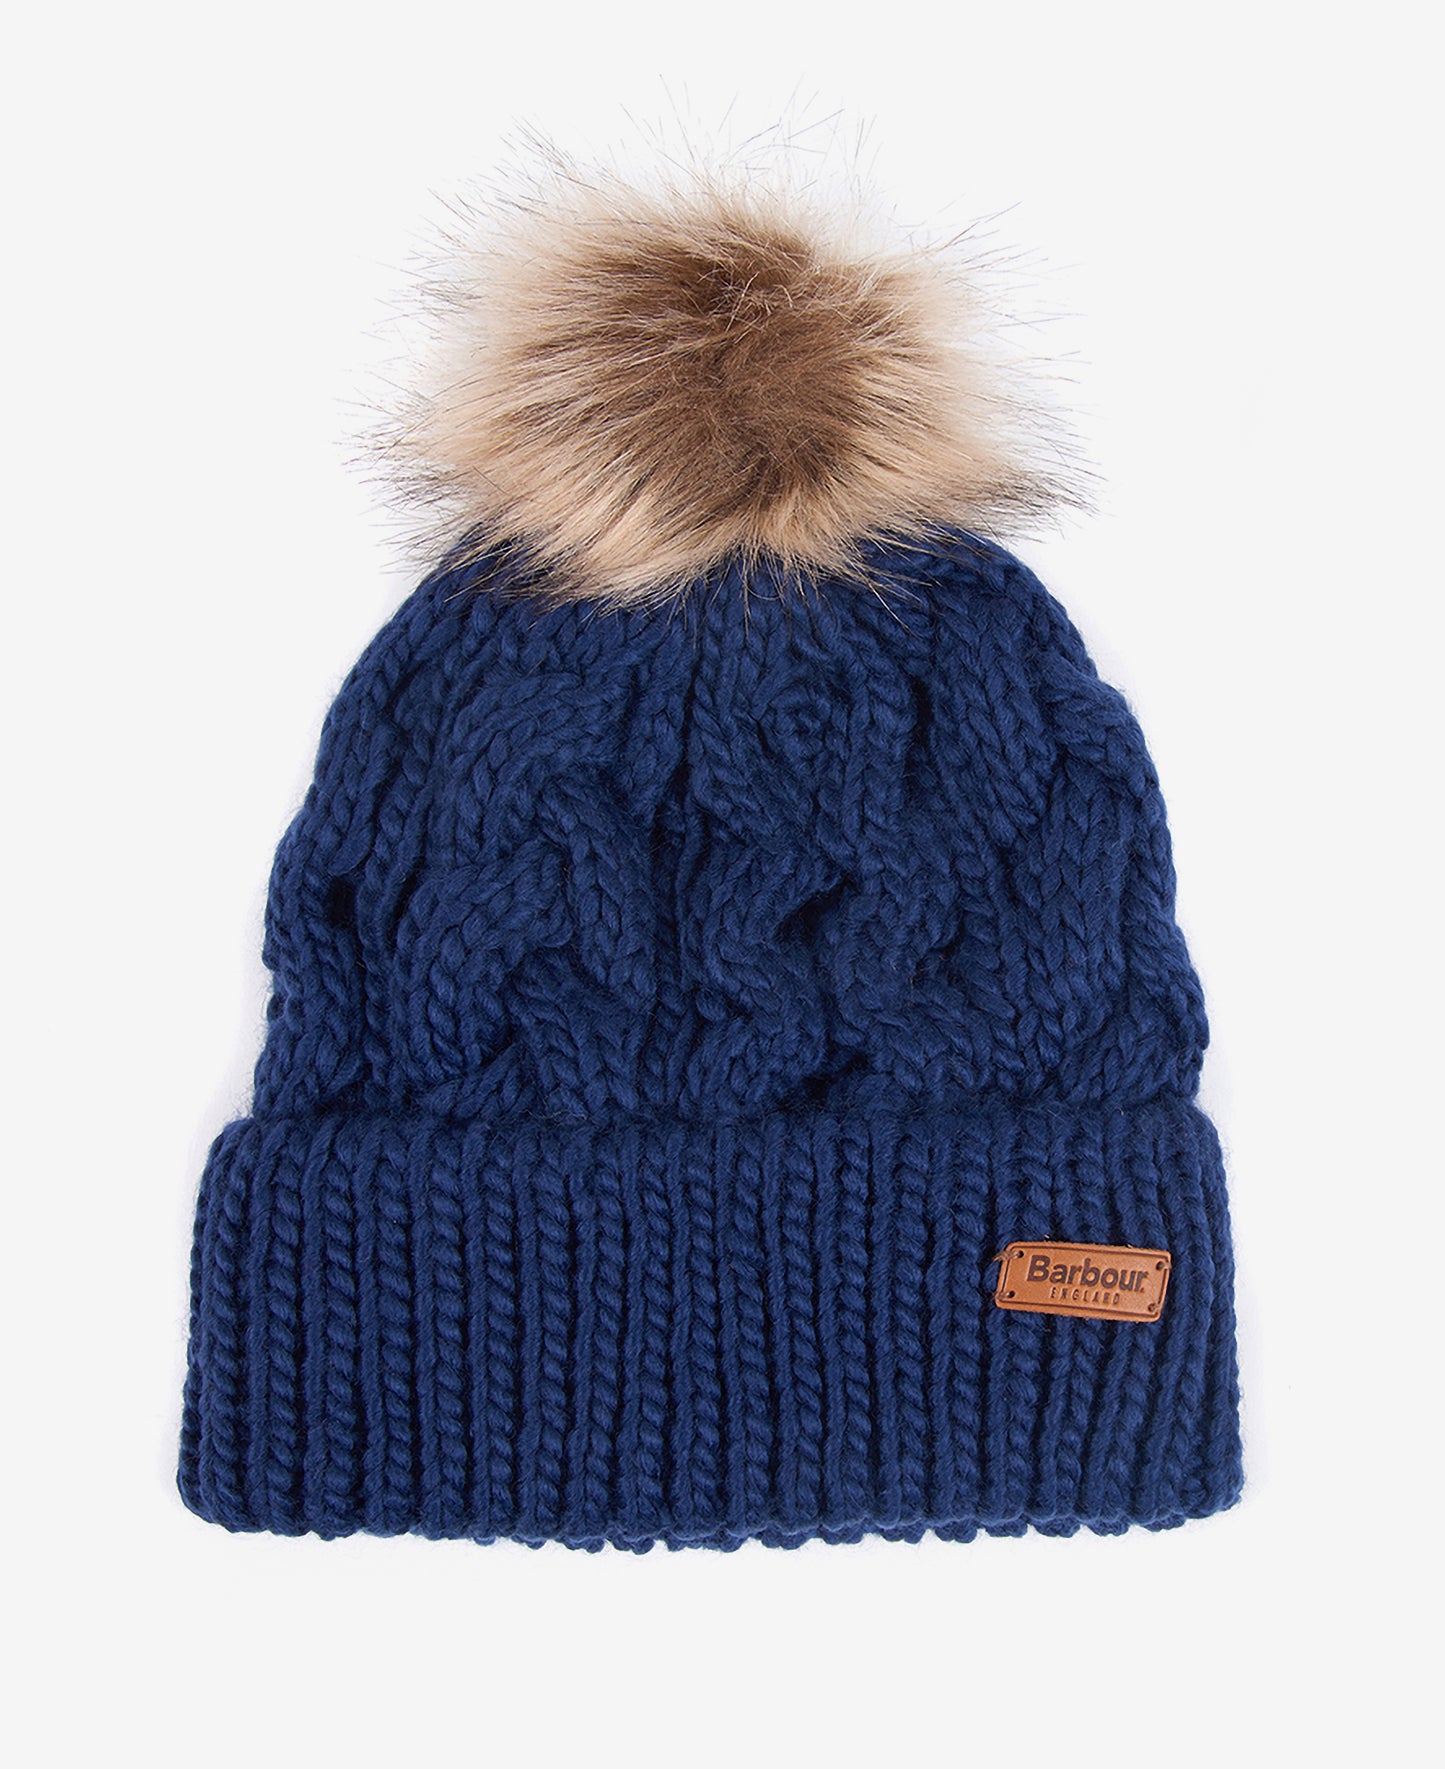 Barbour Penshaw Cable Beanie Hat